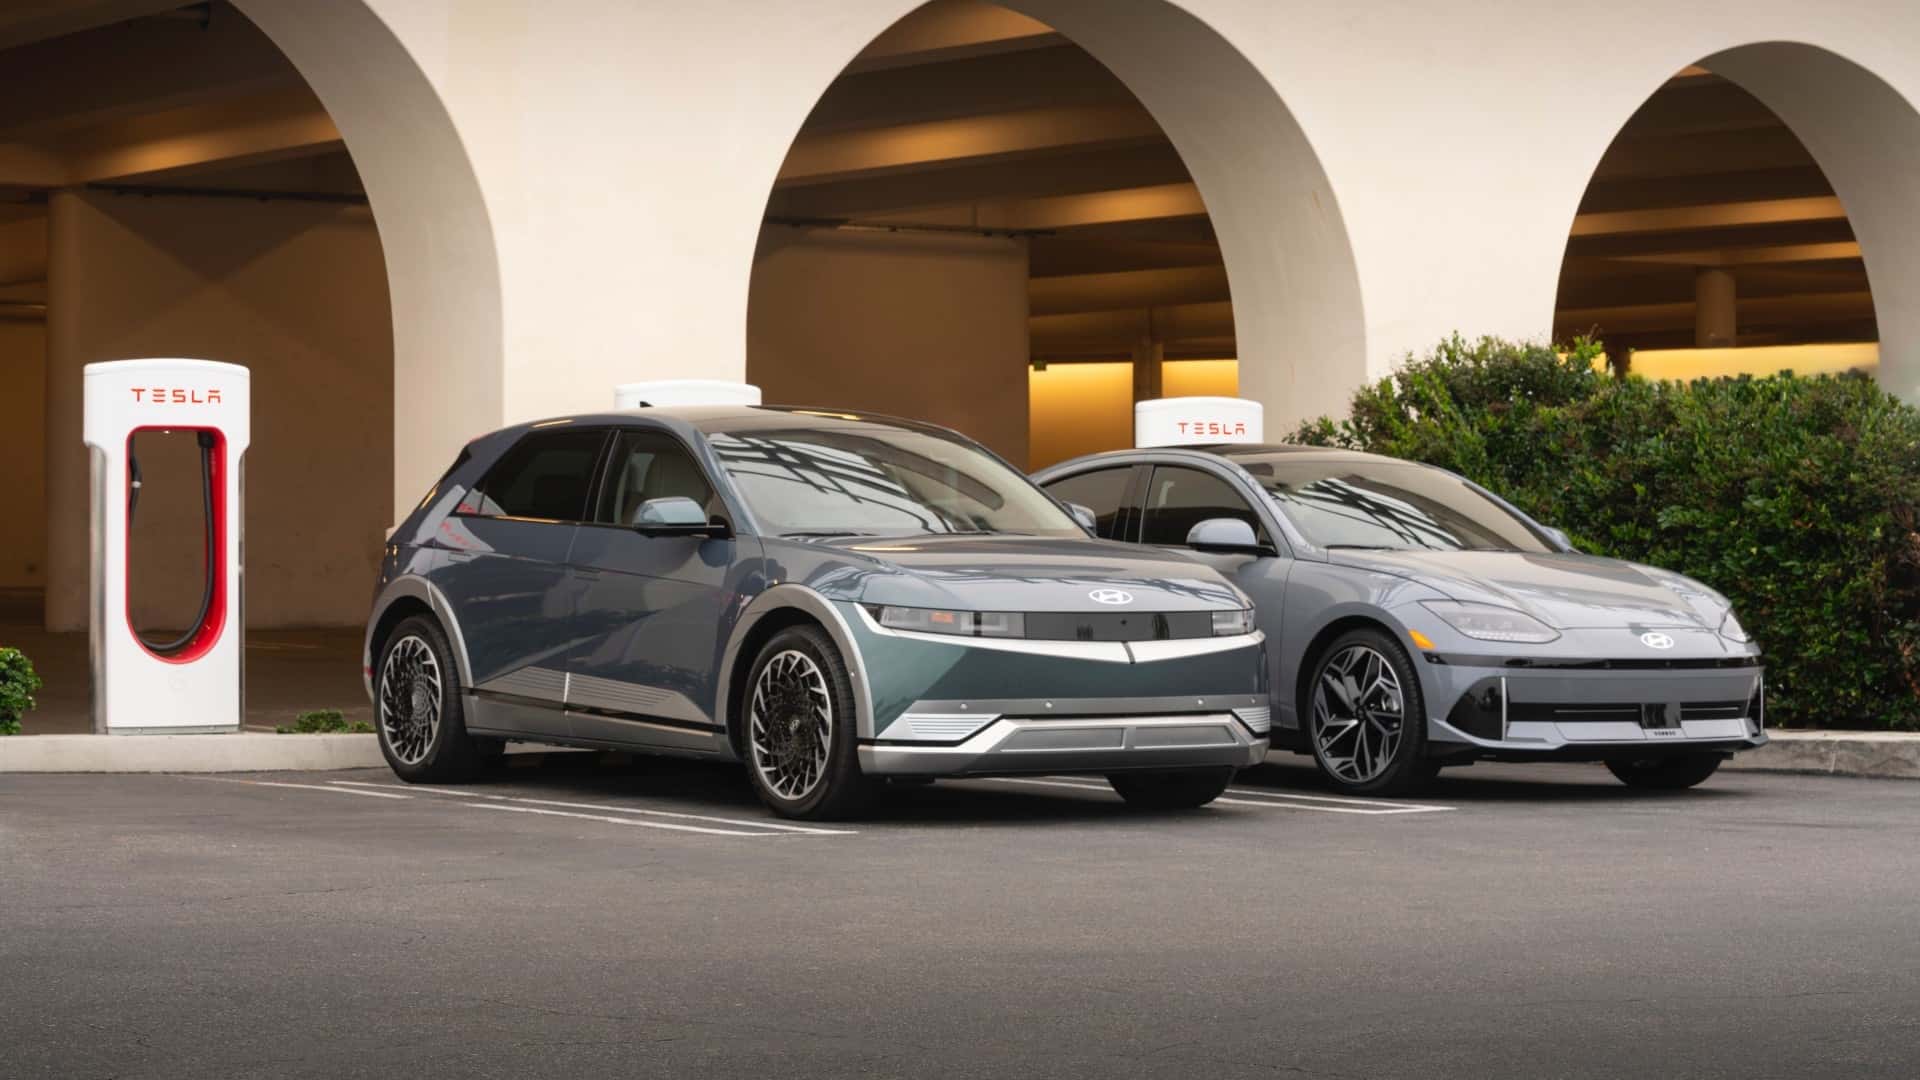 the electric vehicle class of 2019 shows how far we’ve come